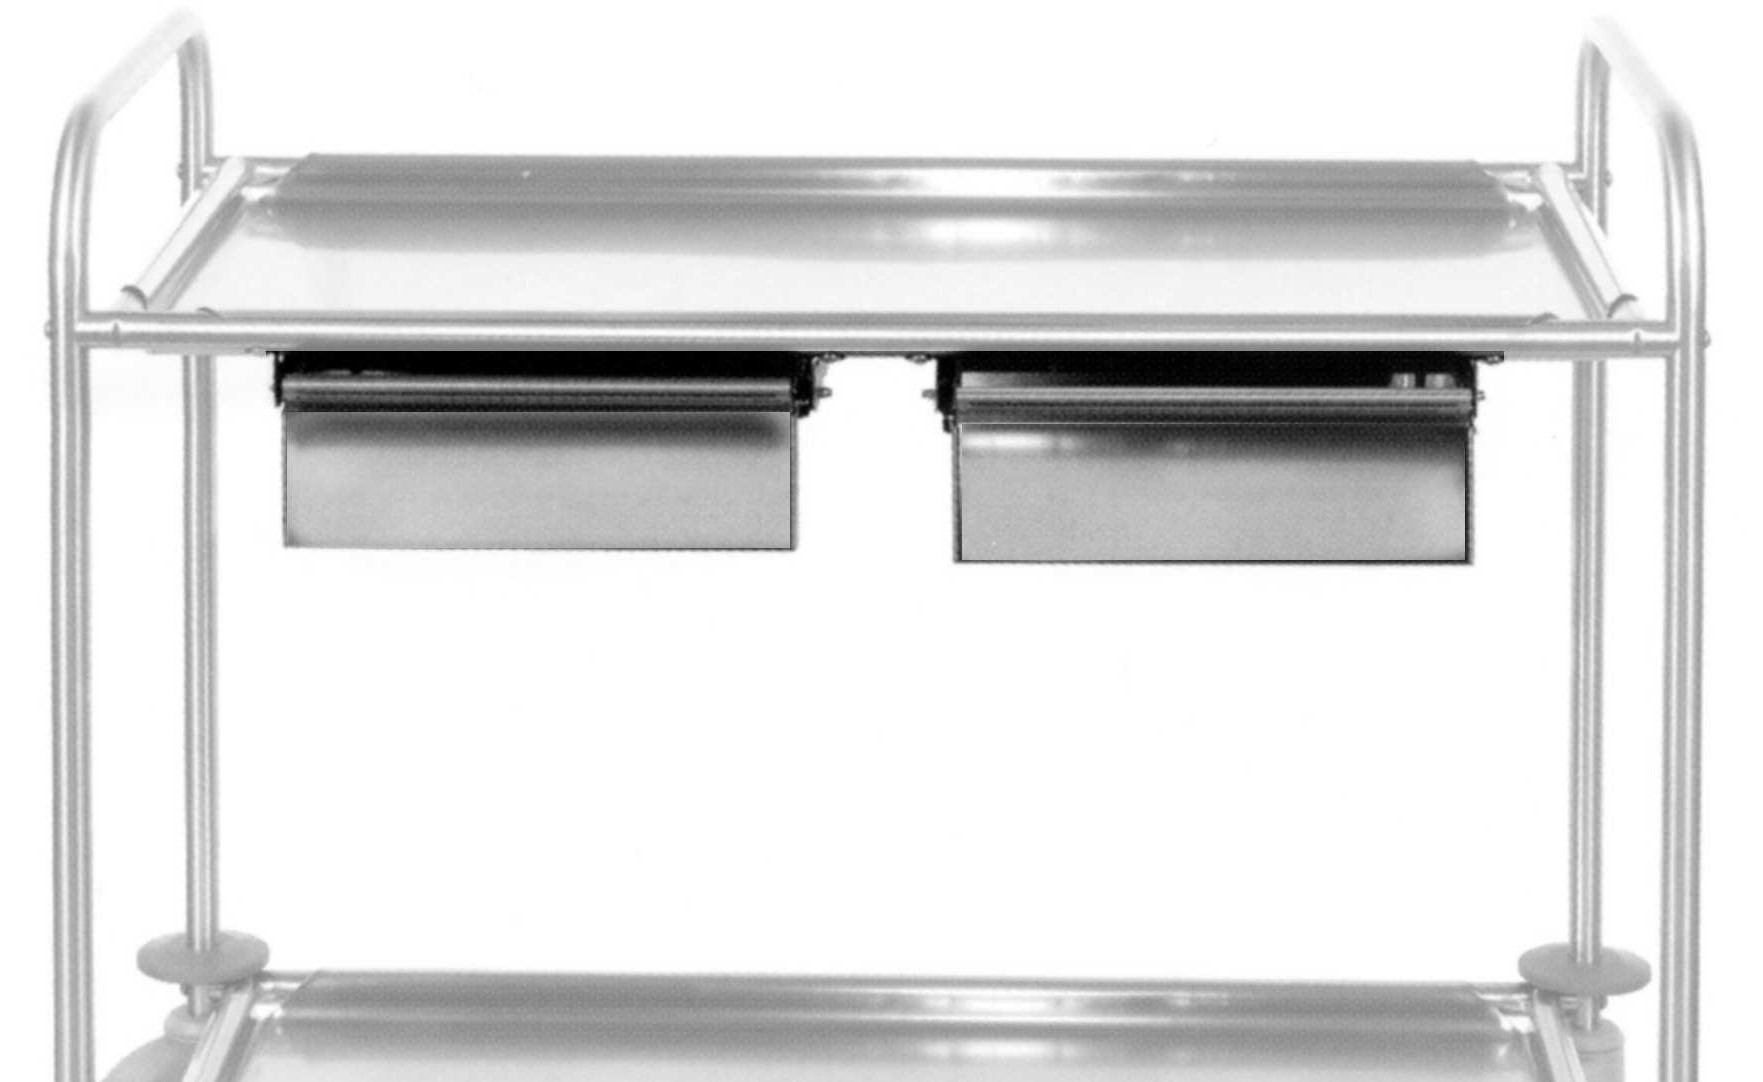 Application of drawer in the upper shelf of the trolley